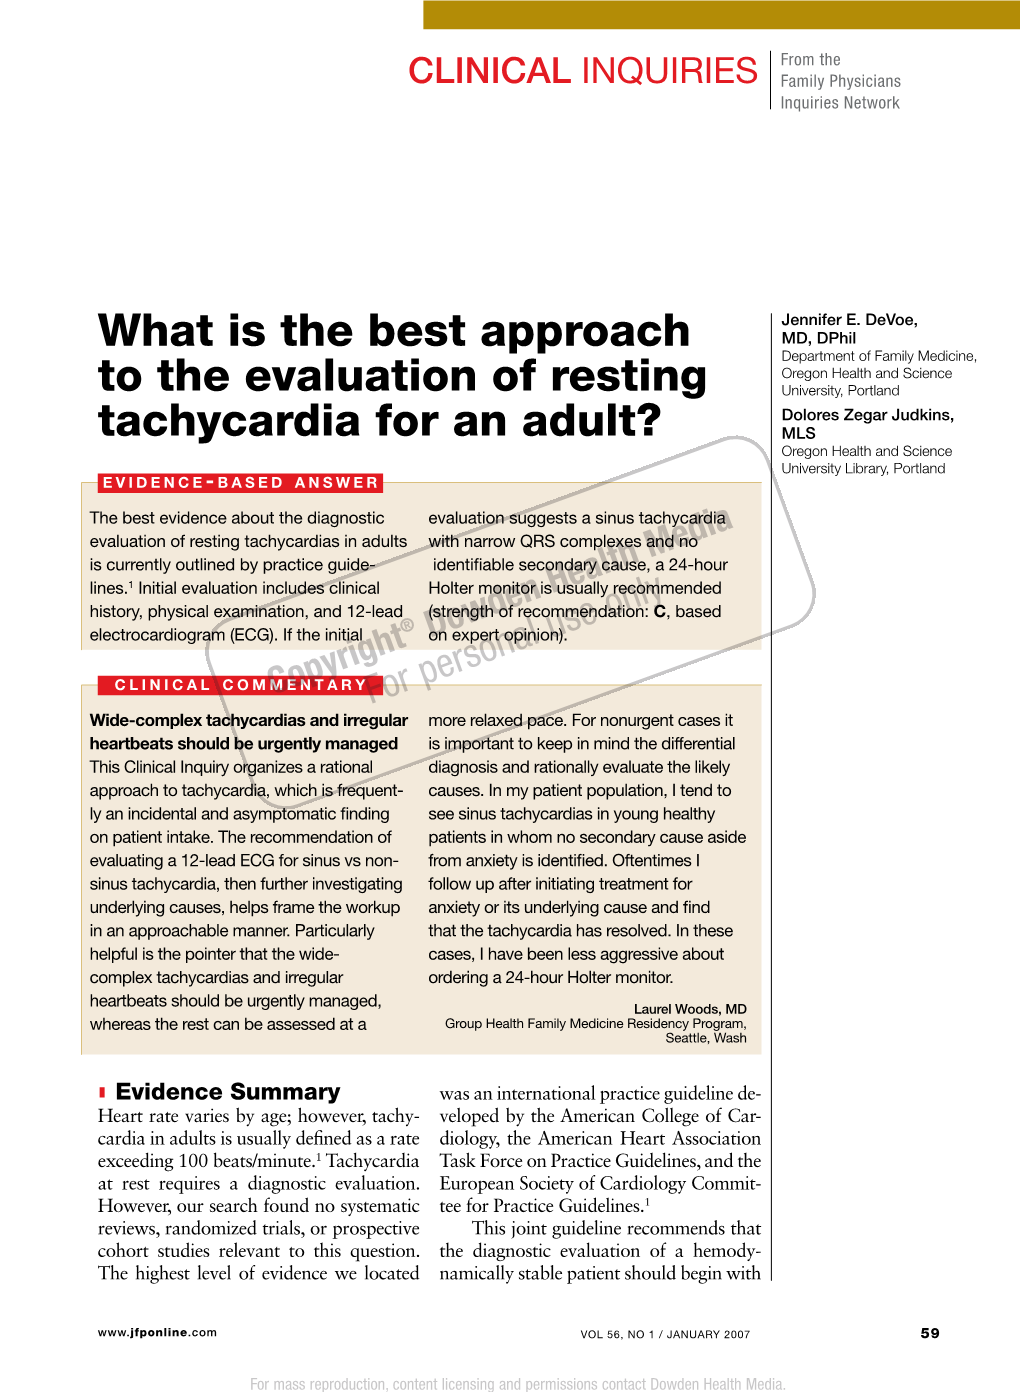 What Is the Best Approach to the Evaluation of Resting Tachycardia For